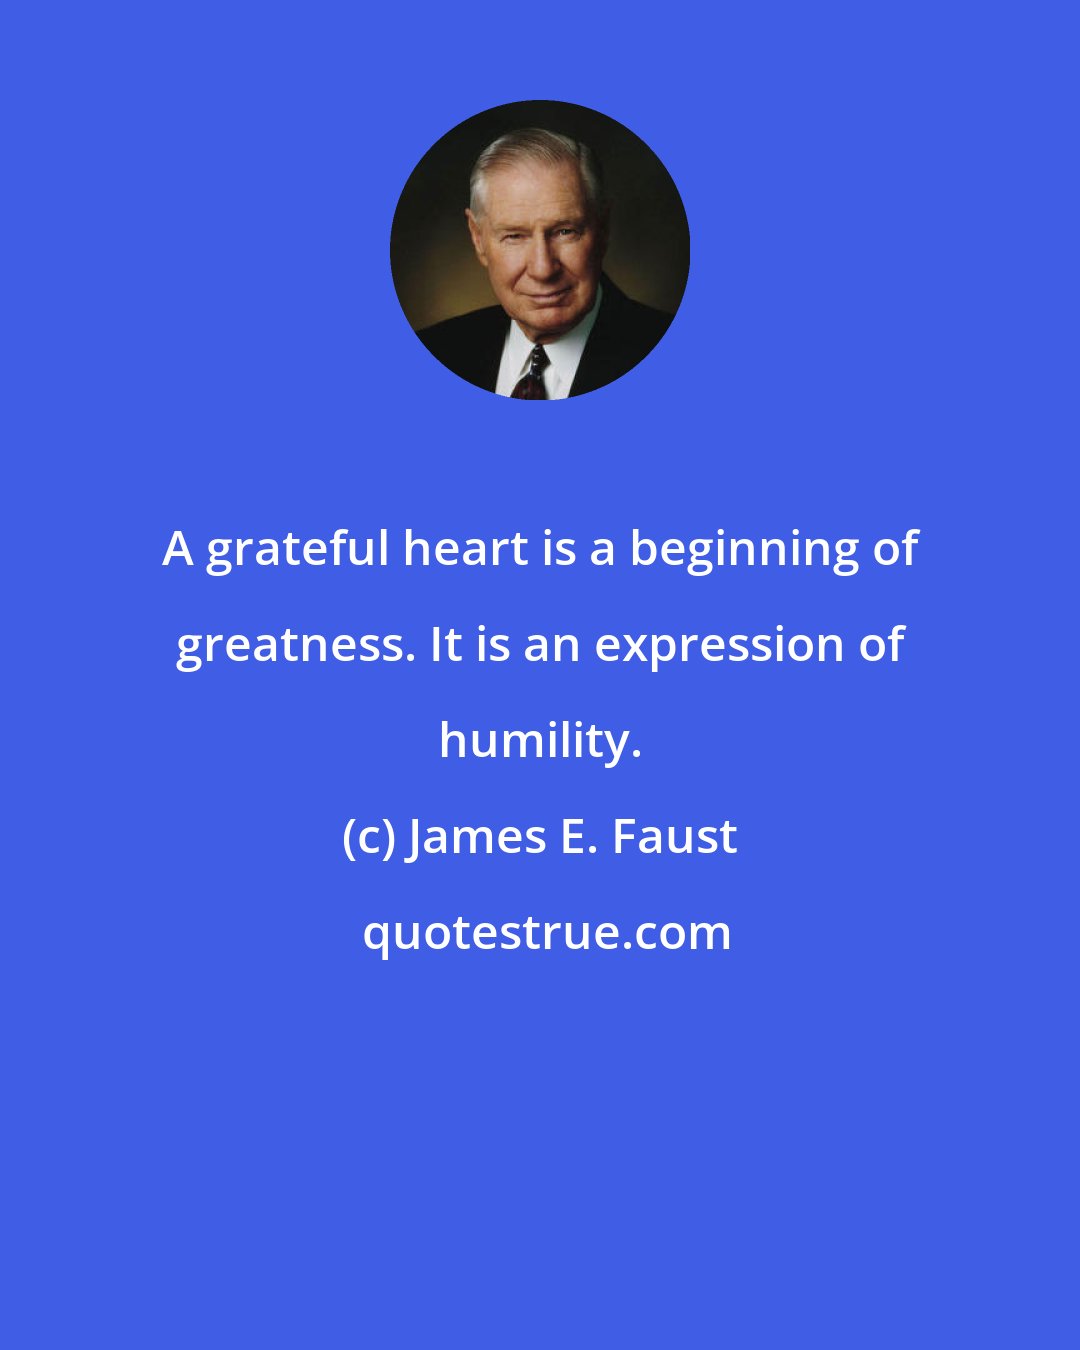 James E. Faust: A grateful heart is a beginning of greatness. It is an expression of humility.